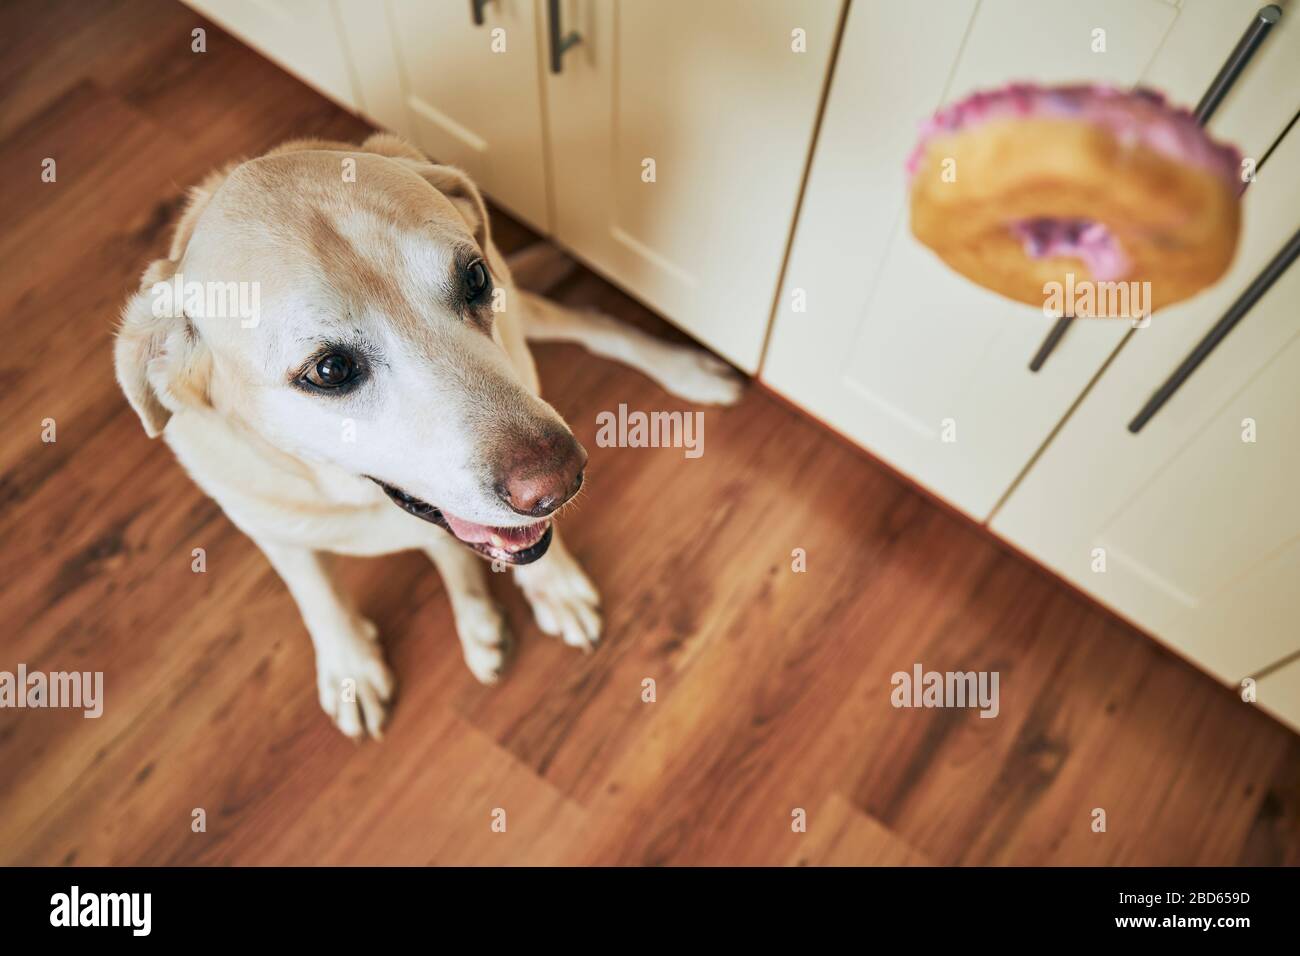 Happy dog (labrador retriever) looking on falling donut at home kitchen. Stock Photo